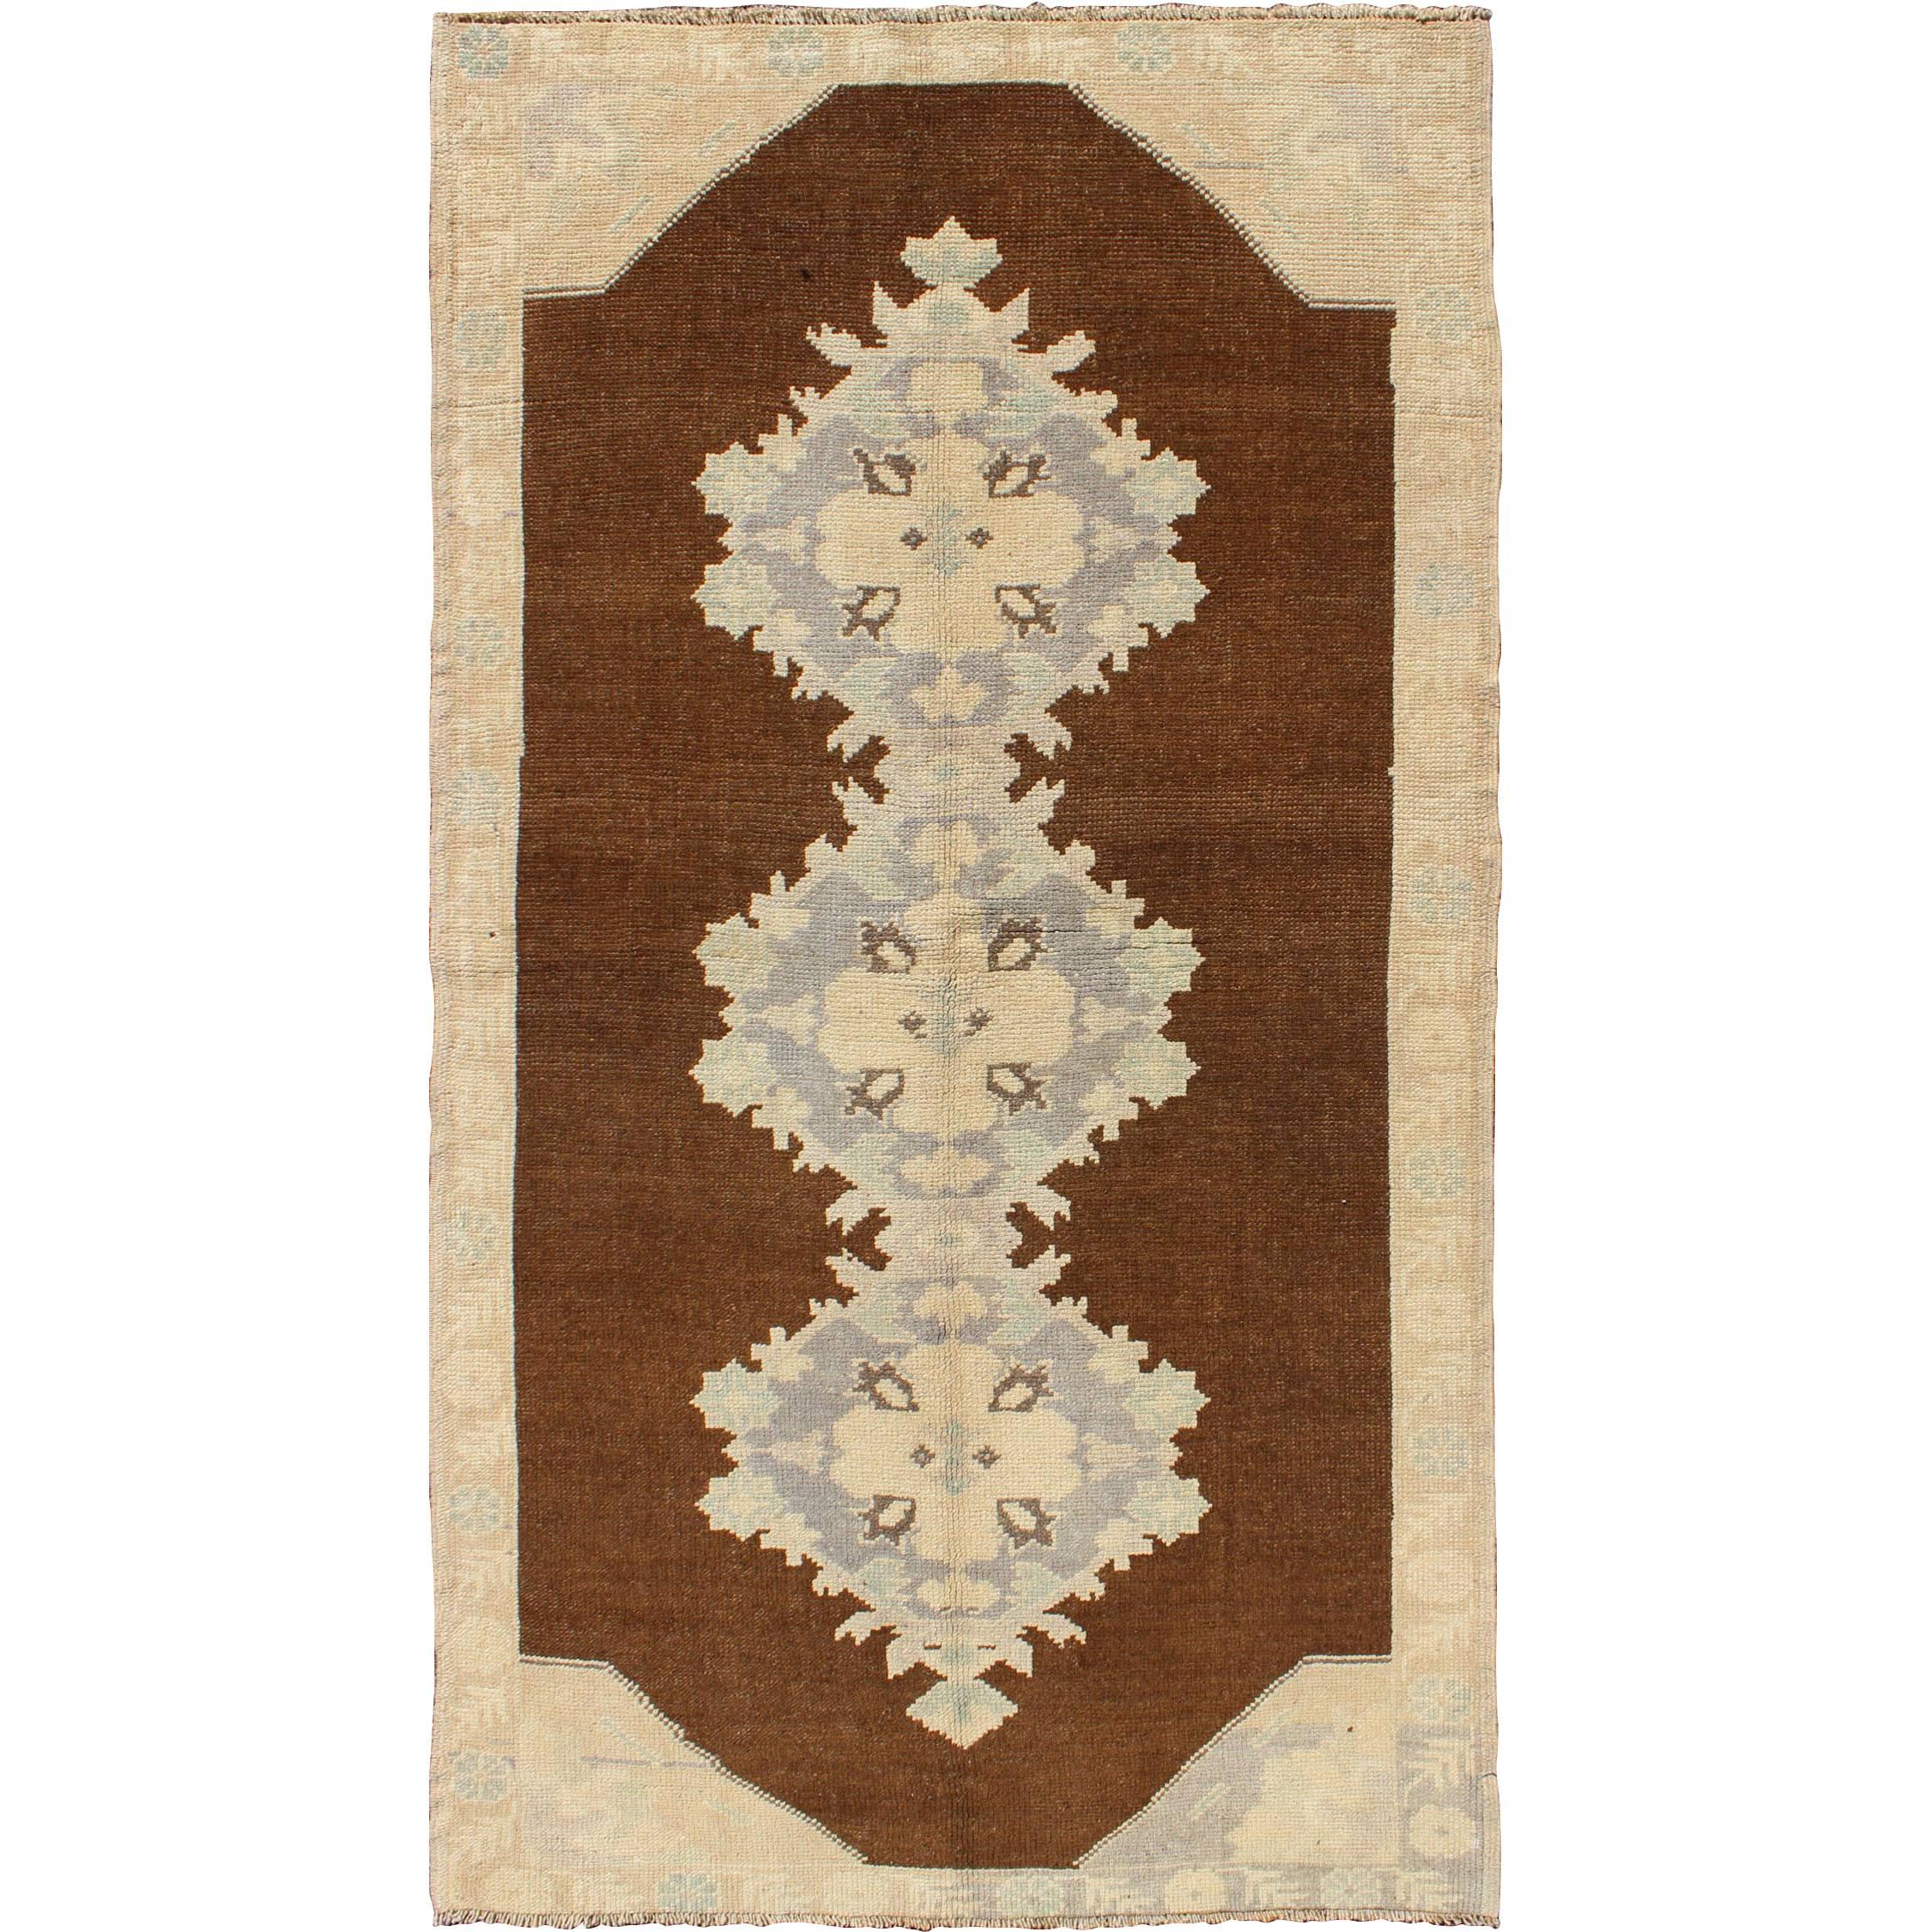 Vintage Turkish Oushak Runner with Floral Medallions in Brown, Gray, Taupe